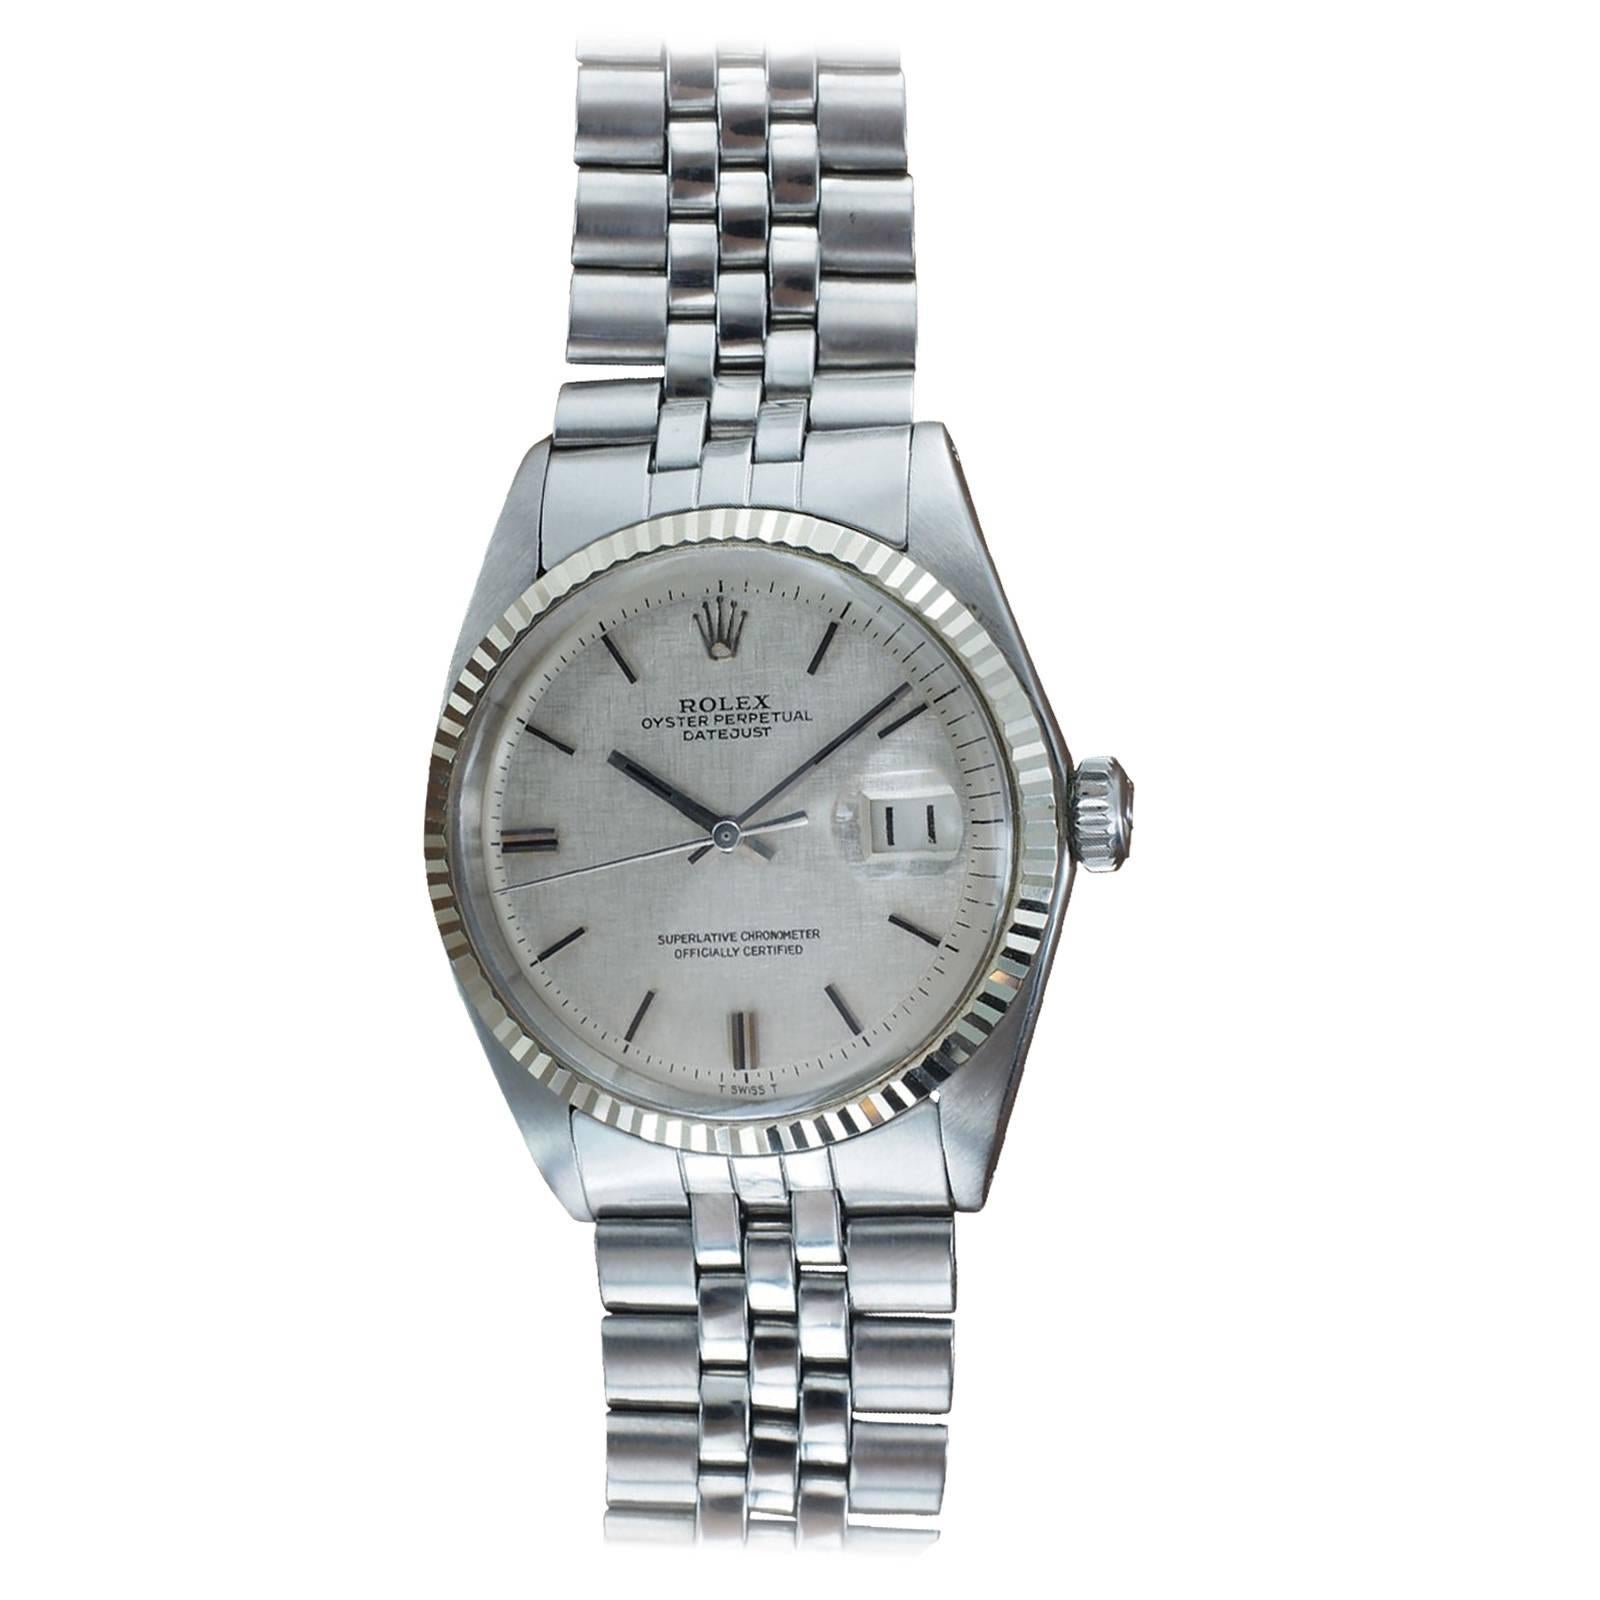 Rolex White Gold Oyster Perpetual Datejust Self Winding Wristwatch Ref 1601 For Sale